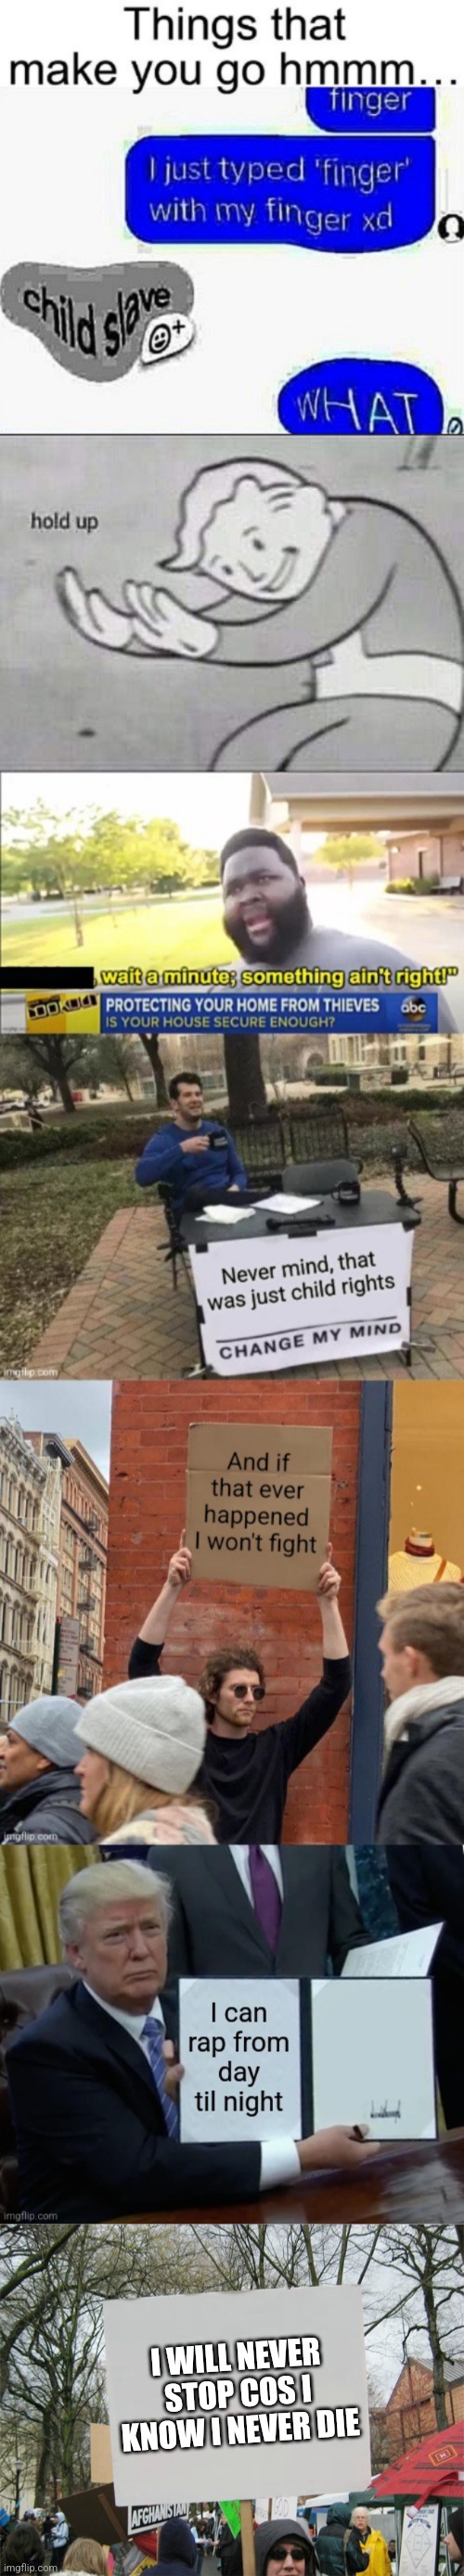 I WILL NEVER STOP COS I KNOW I NEVER DIE | image tagged in blank protest sign | made w/ Imgflip meme maker